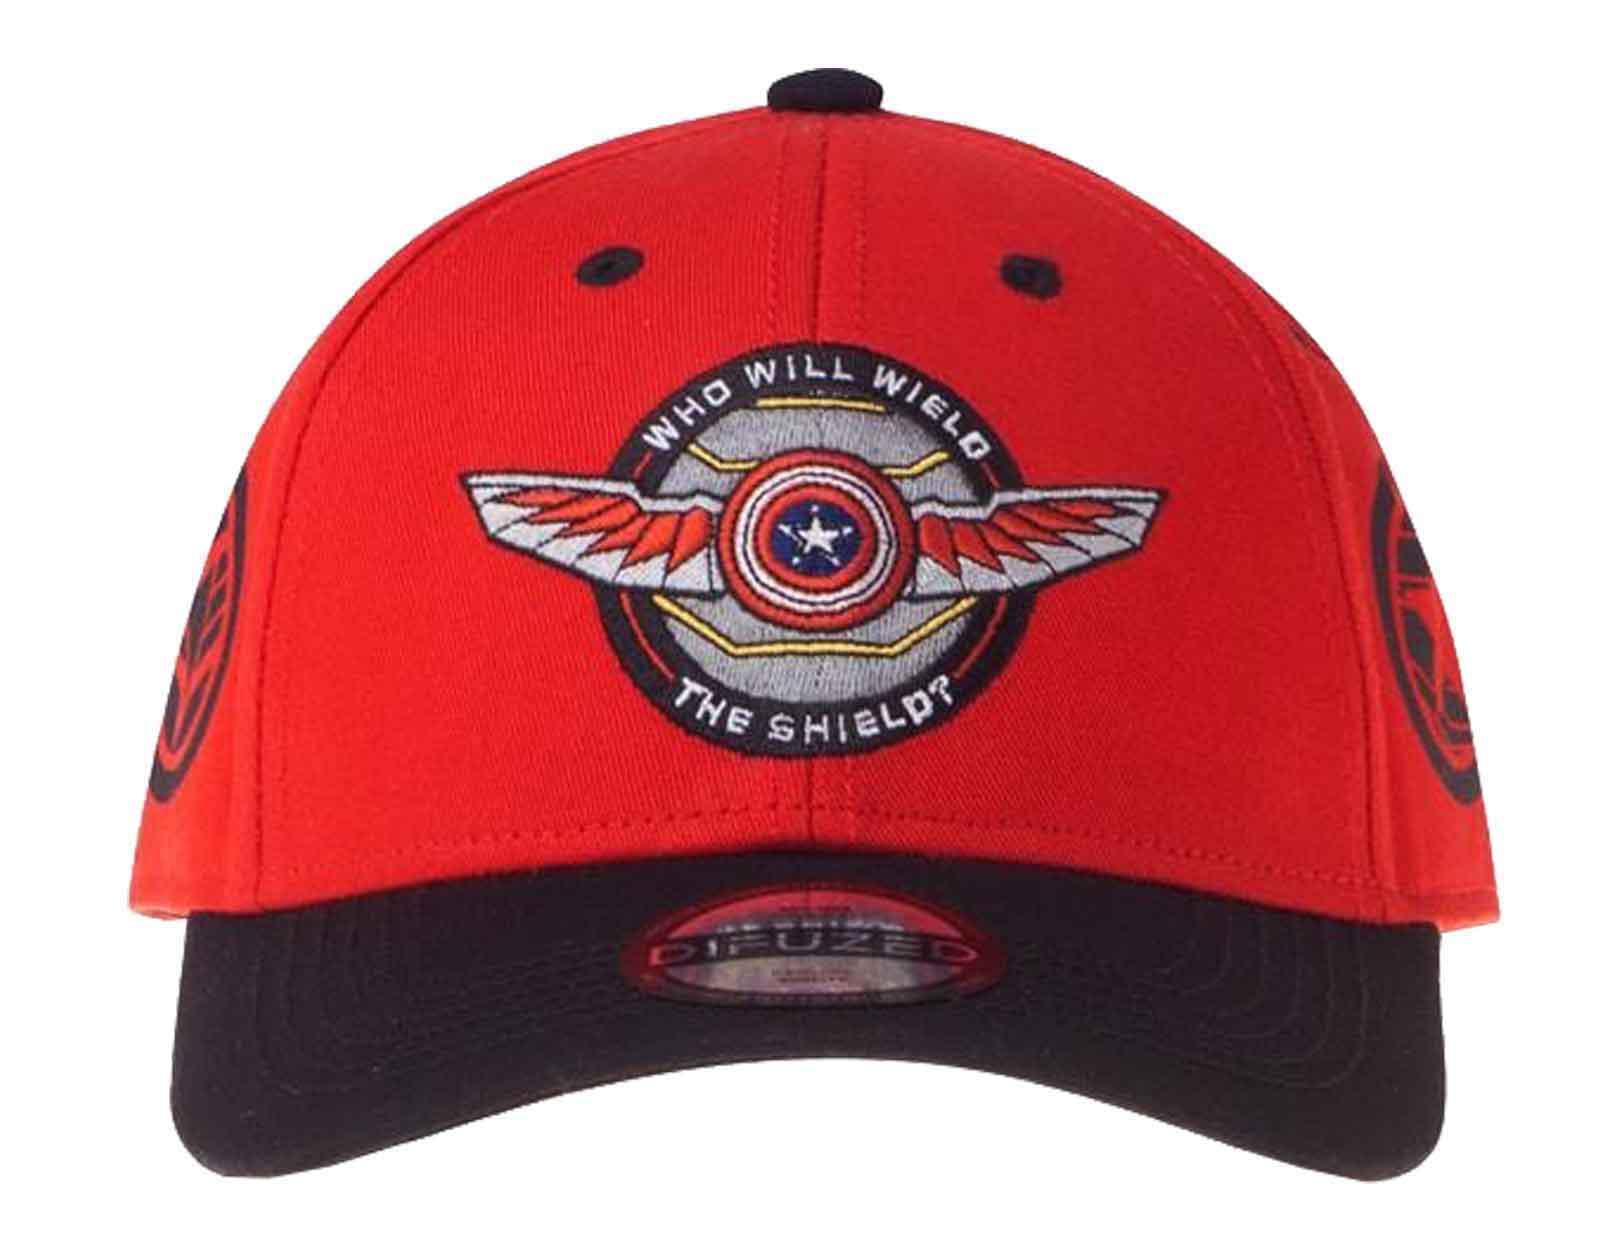 Winter Soldier Baseball Cap Wield the Shield new Official Marvel Red Strapback